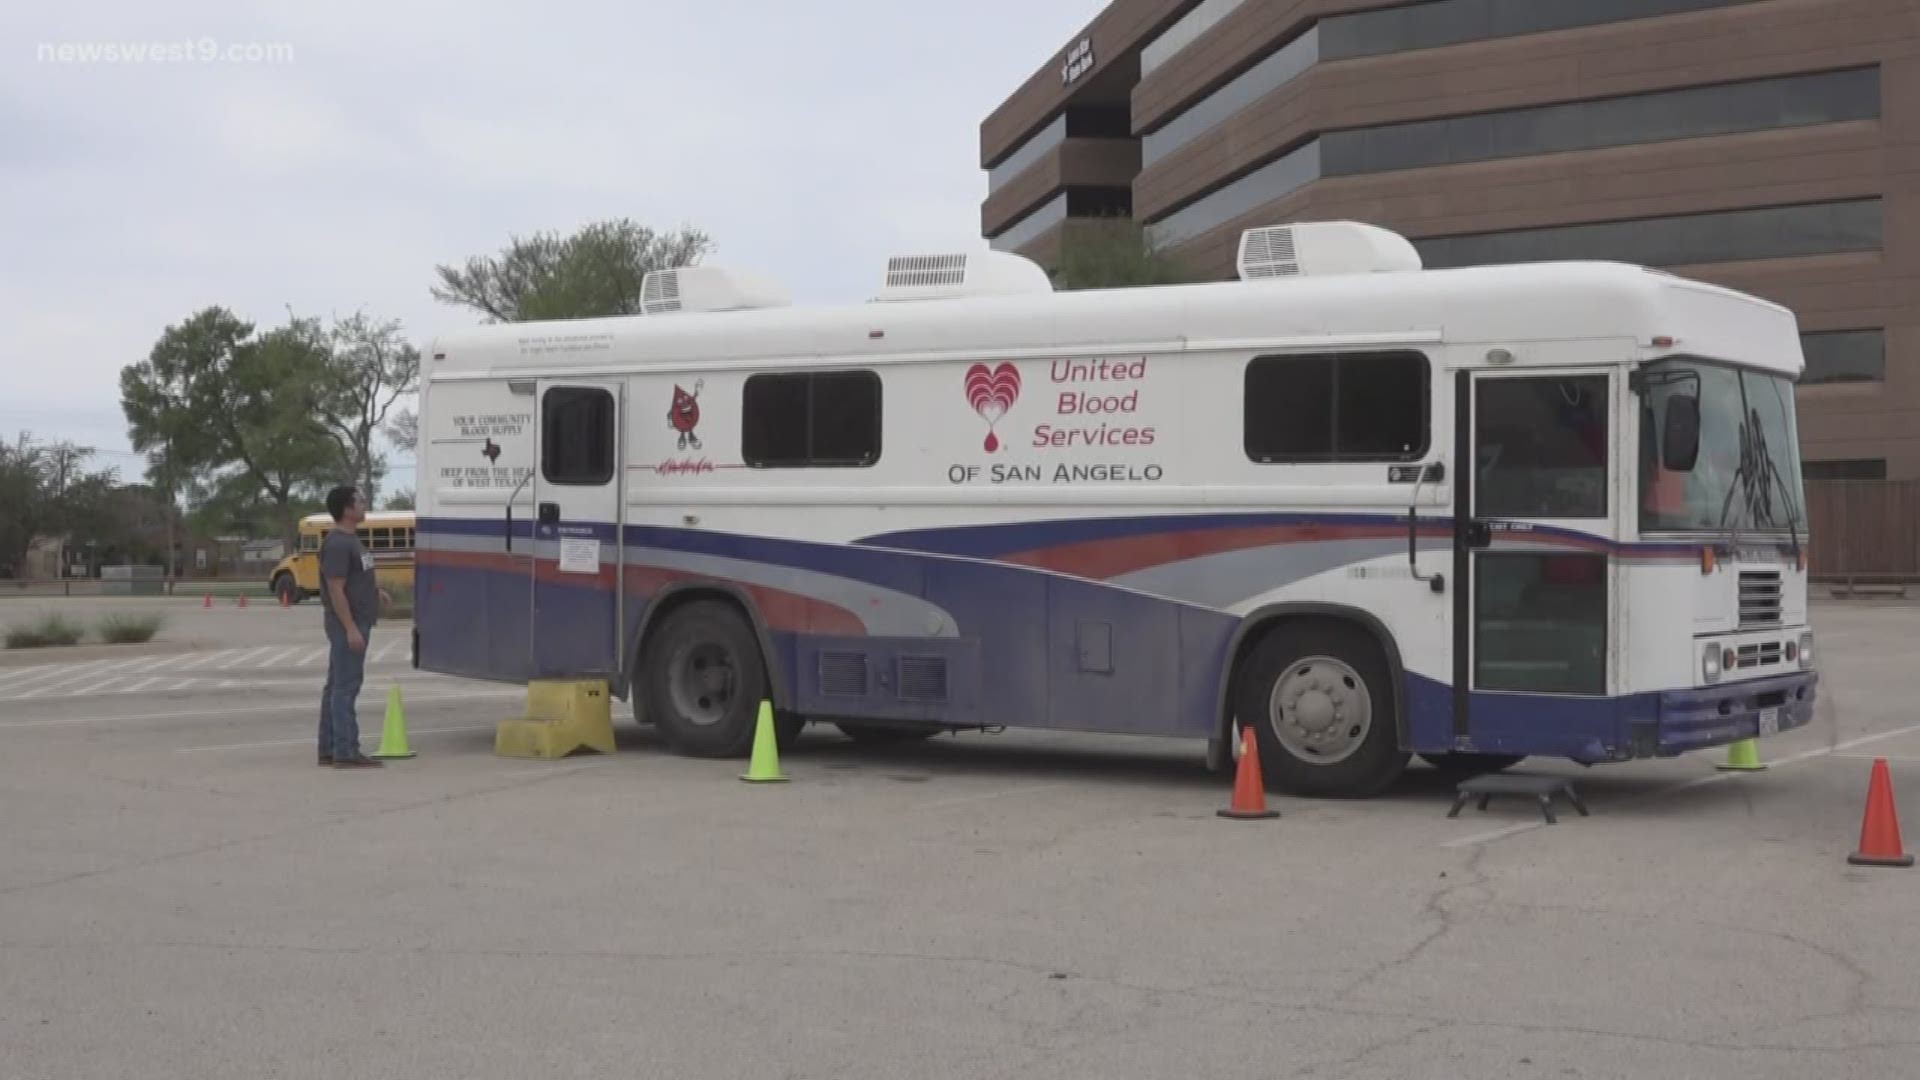 There will be two more blood drives in the coming week, on March 30 and April 18.